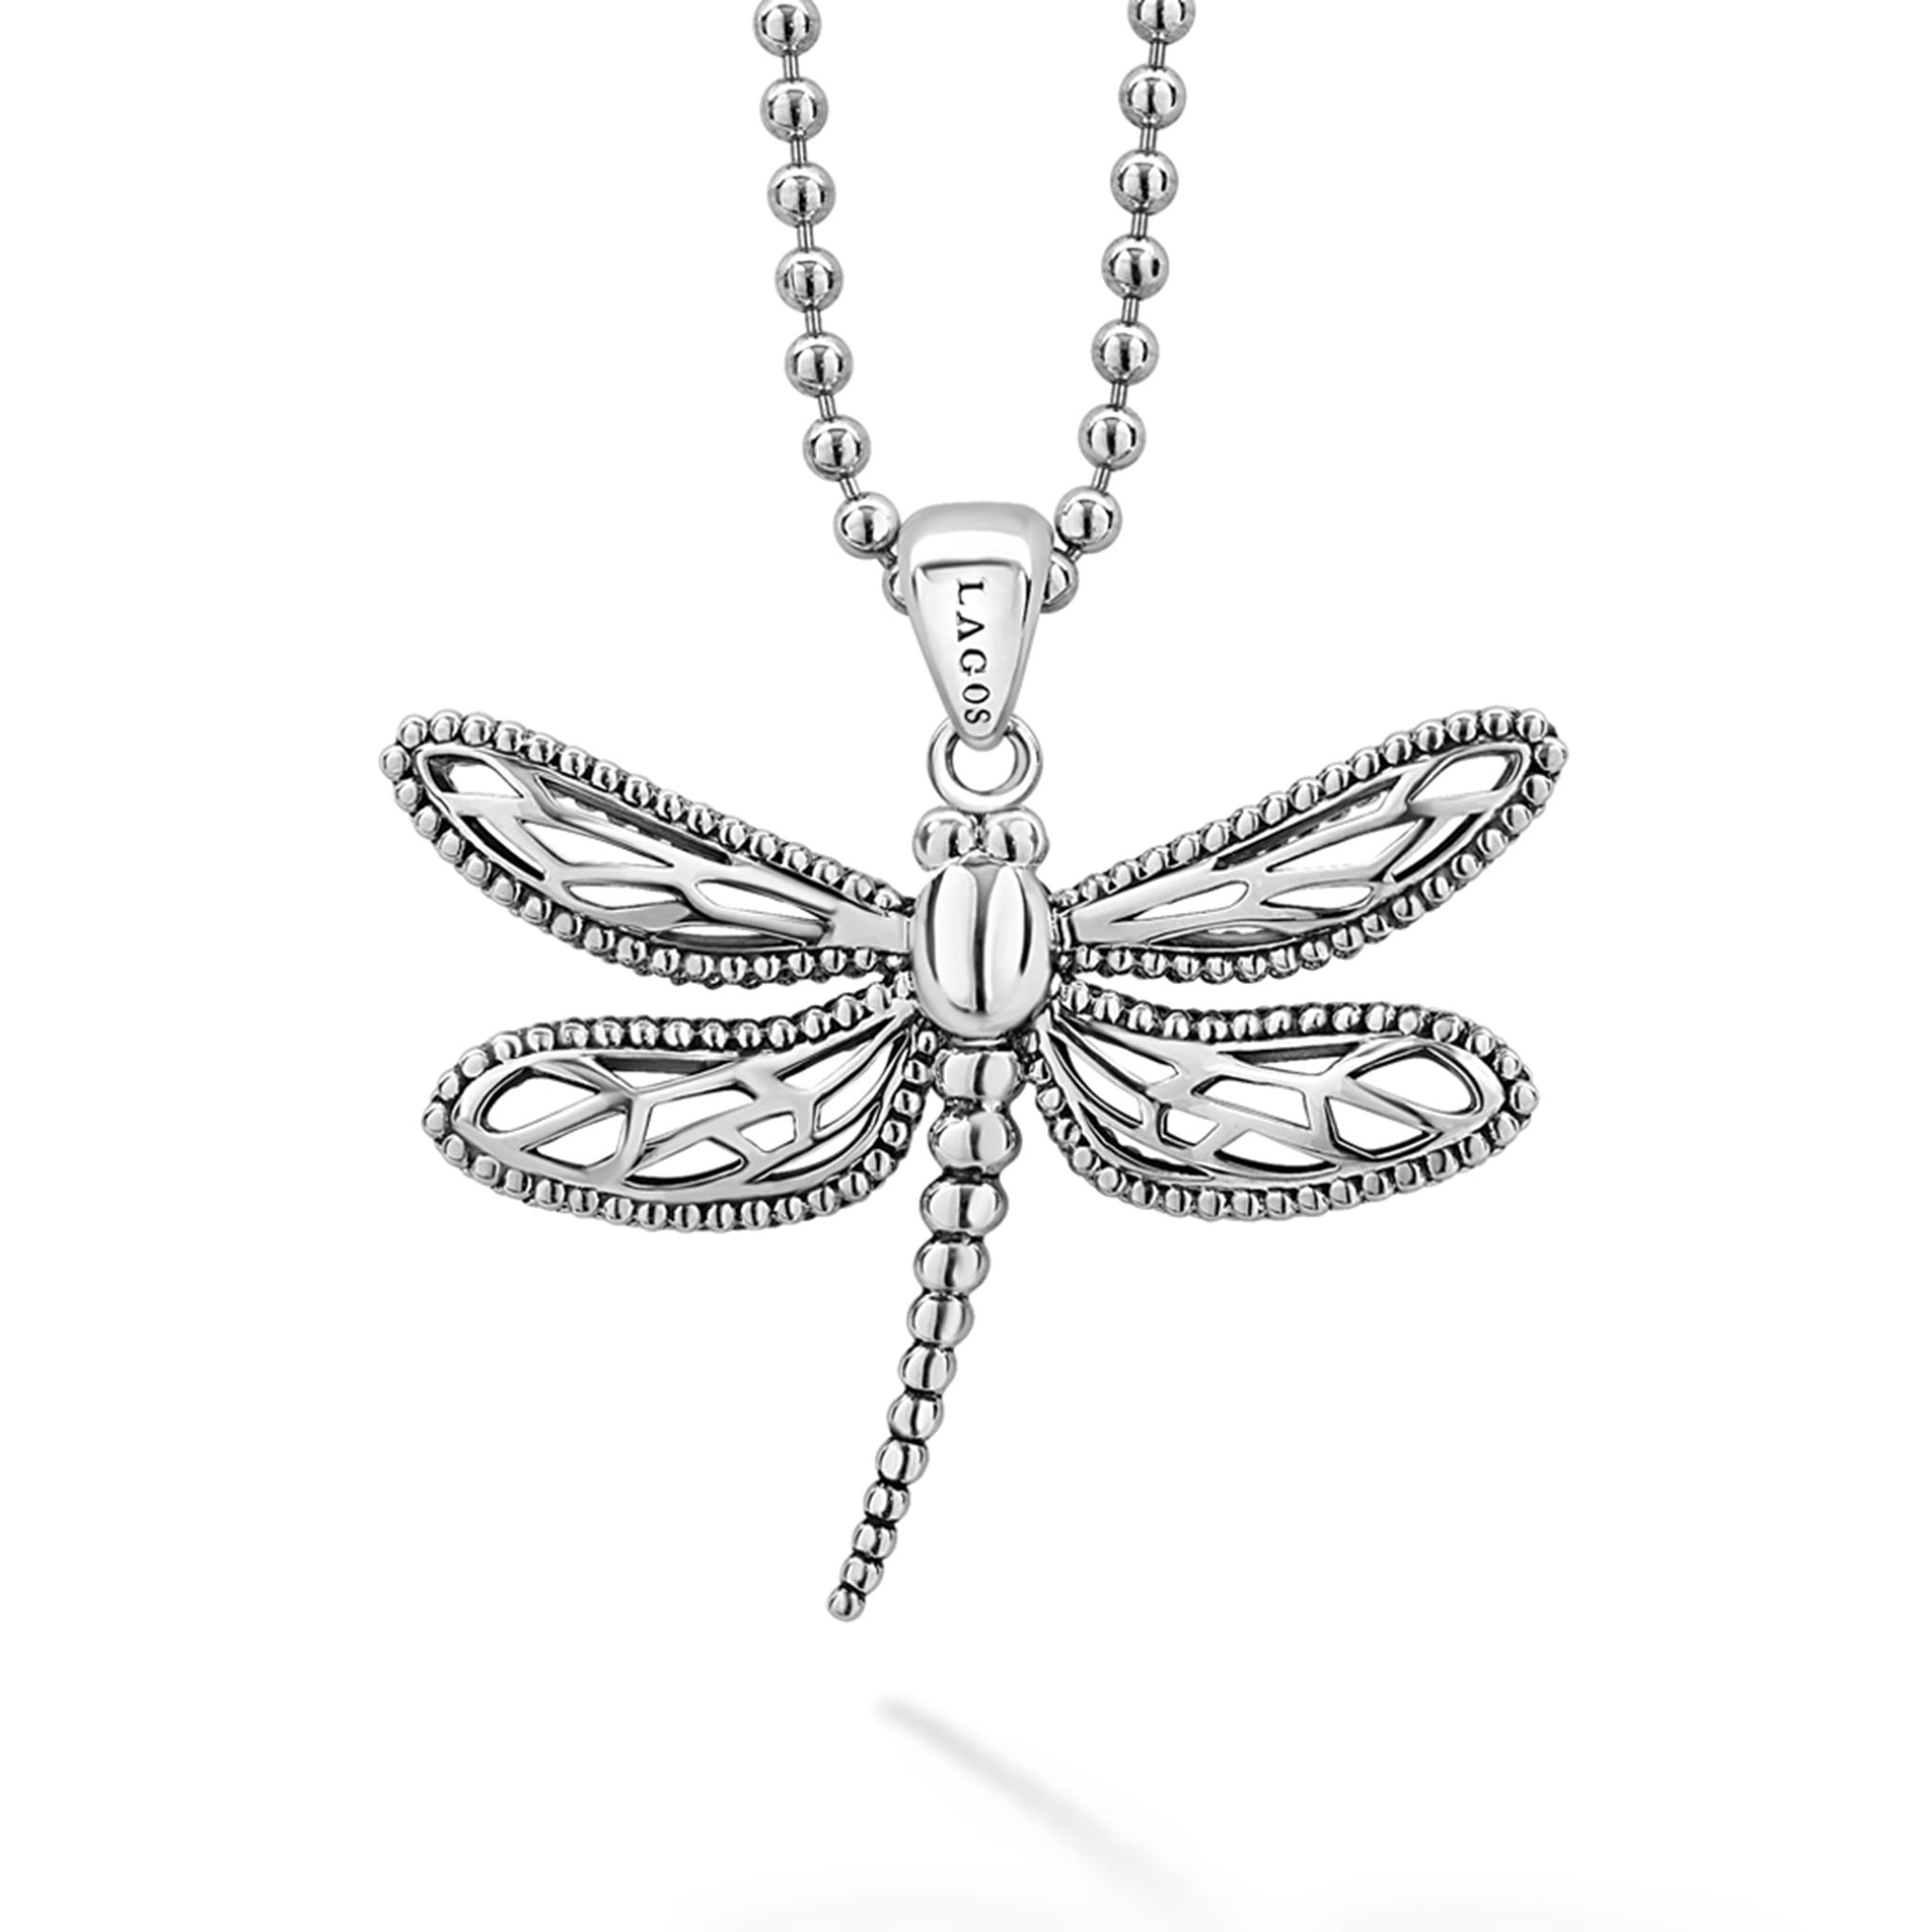 Necklace Large Dragonfly,2021 Brand New Fine Jewelry Europe 925